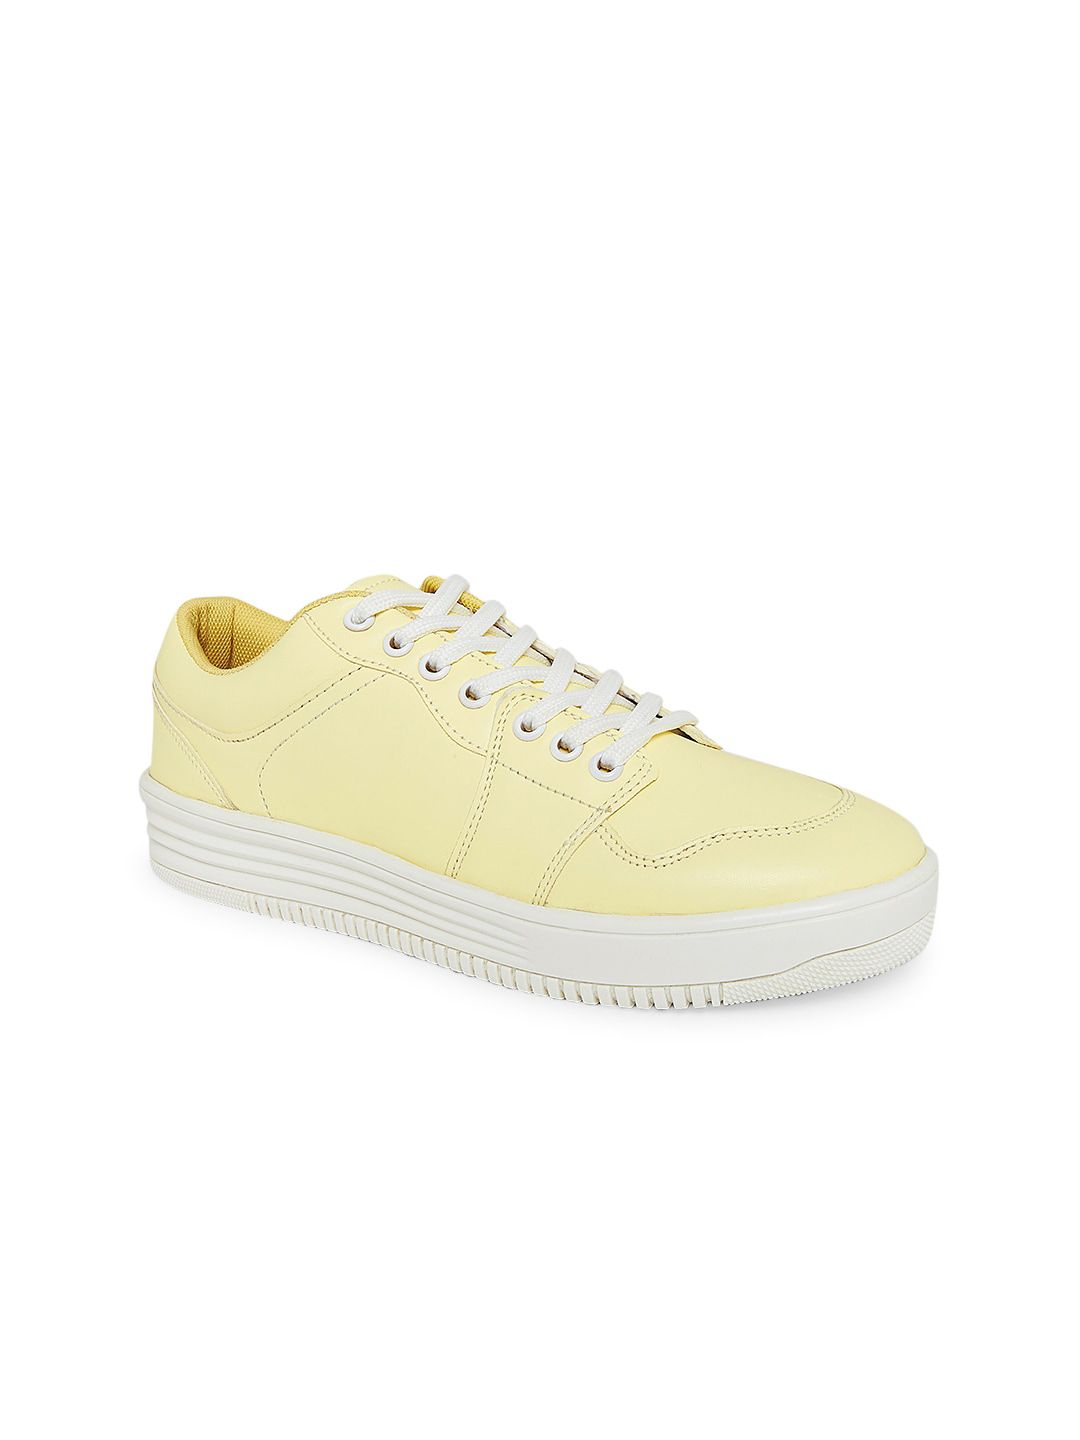 Forever Glam by Pantaloons Women Yellow Solid Lace Up Sneakers Price in India